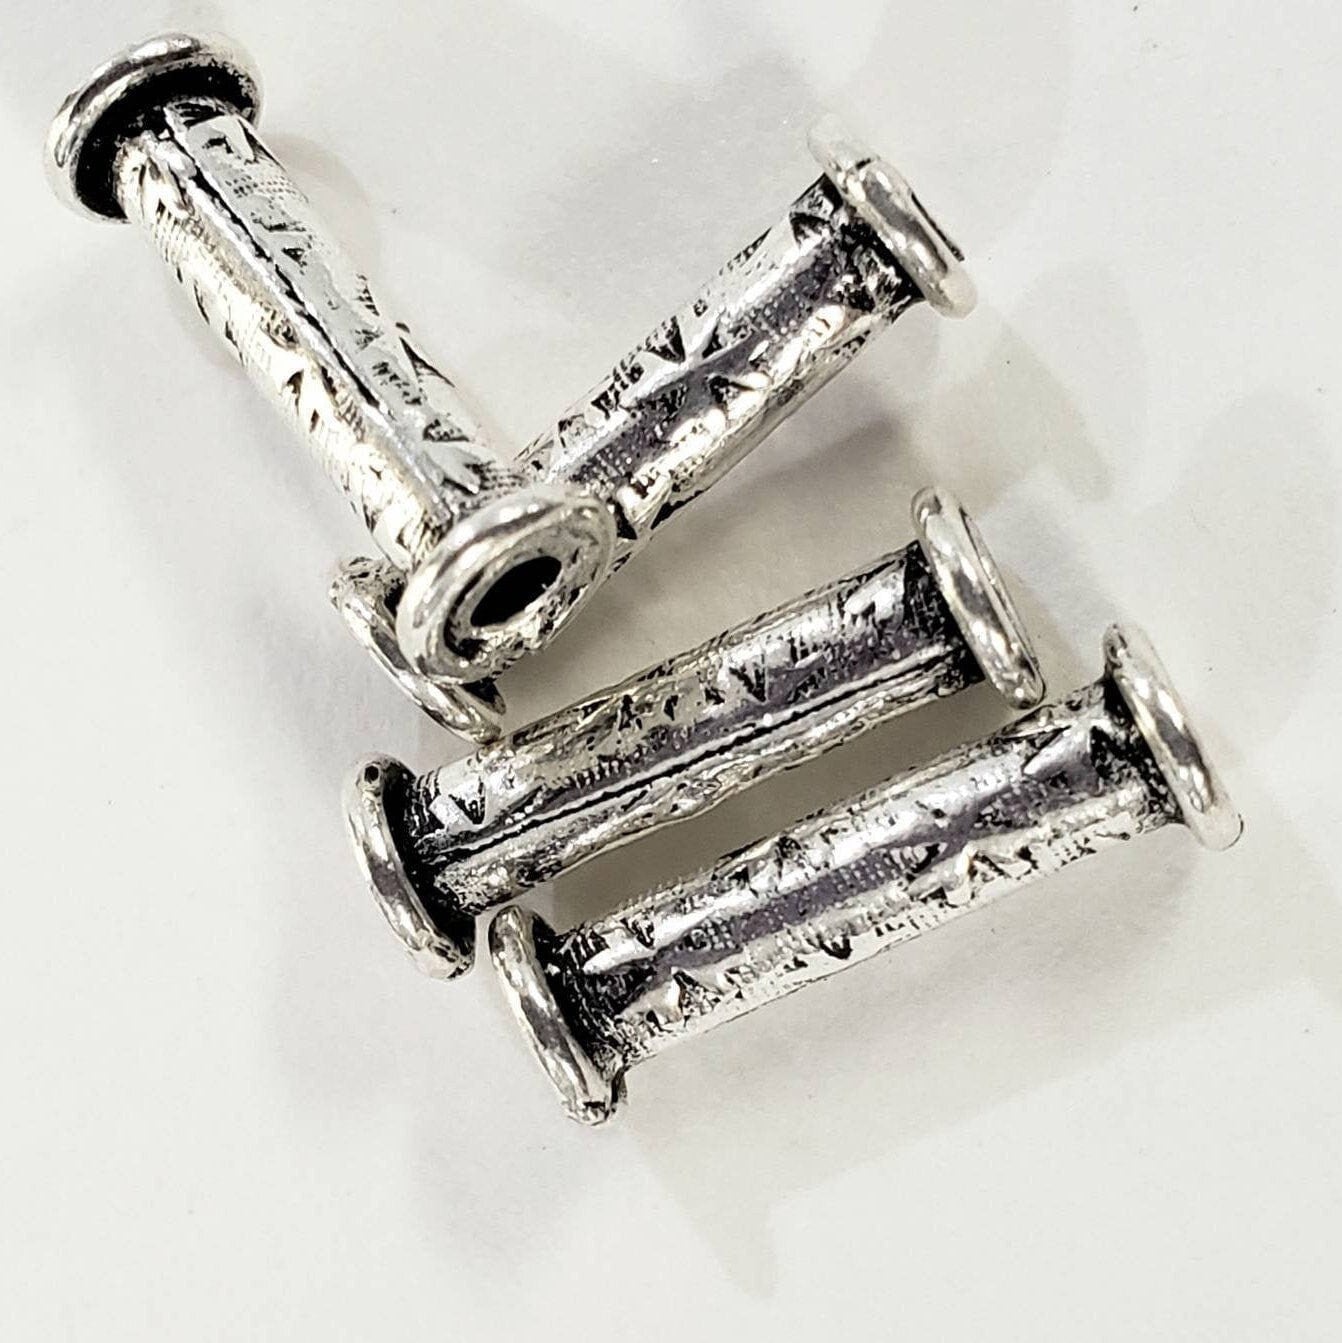 2 Pieces 925 Sterling Silver Bali tube 3x16mm handmade textures vintage spacer for jewelry making Necklace Bracelet earrings supplies.